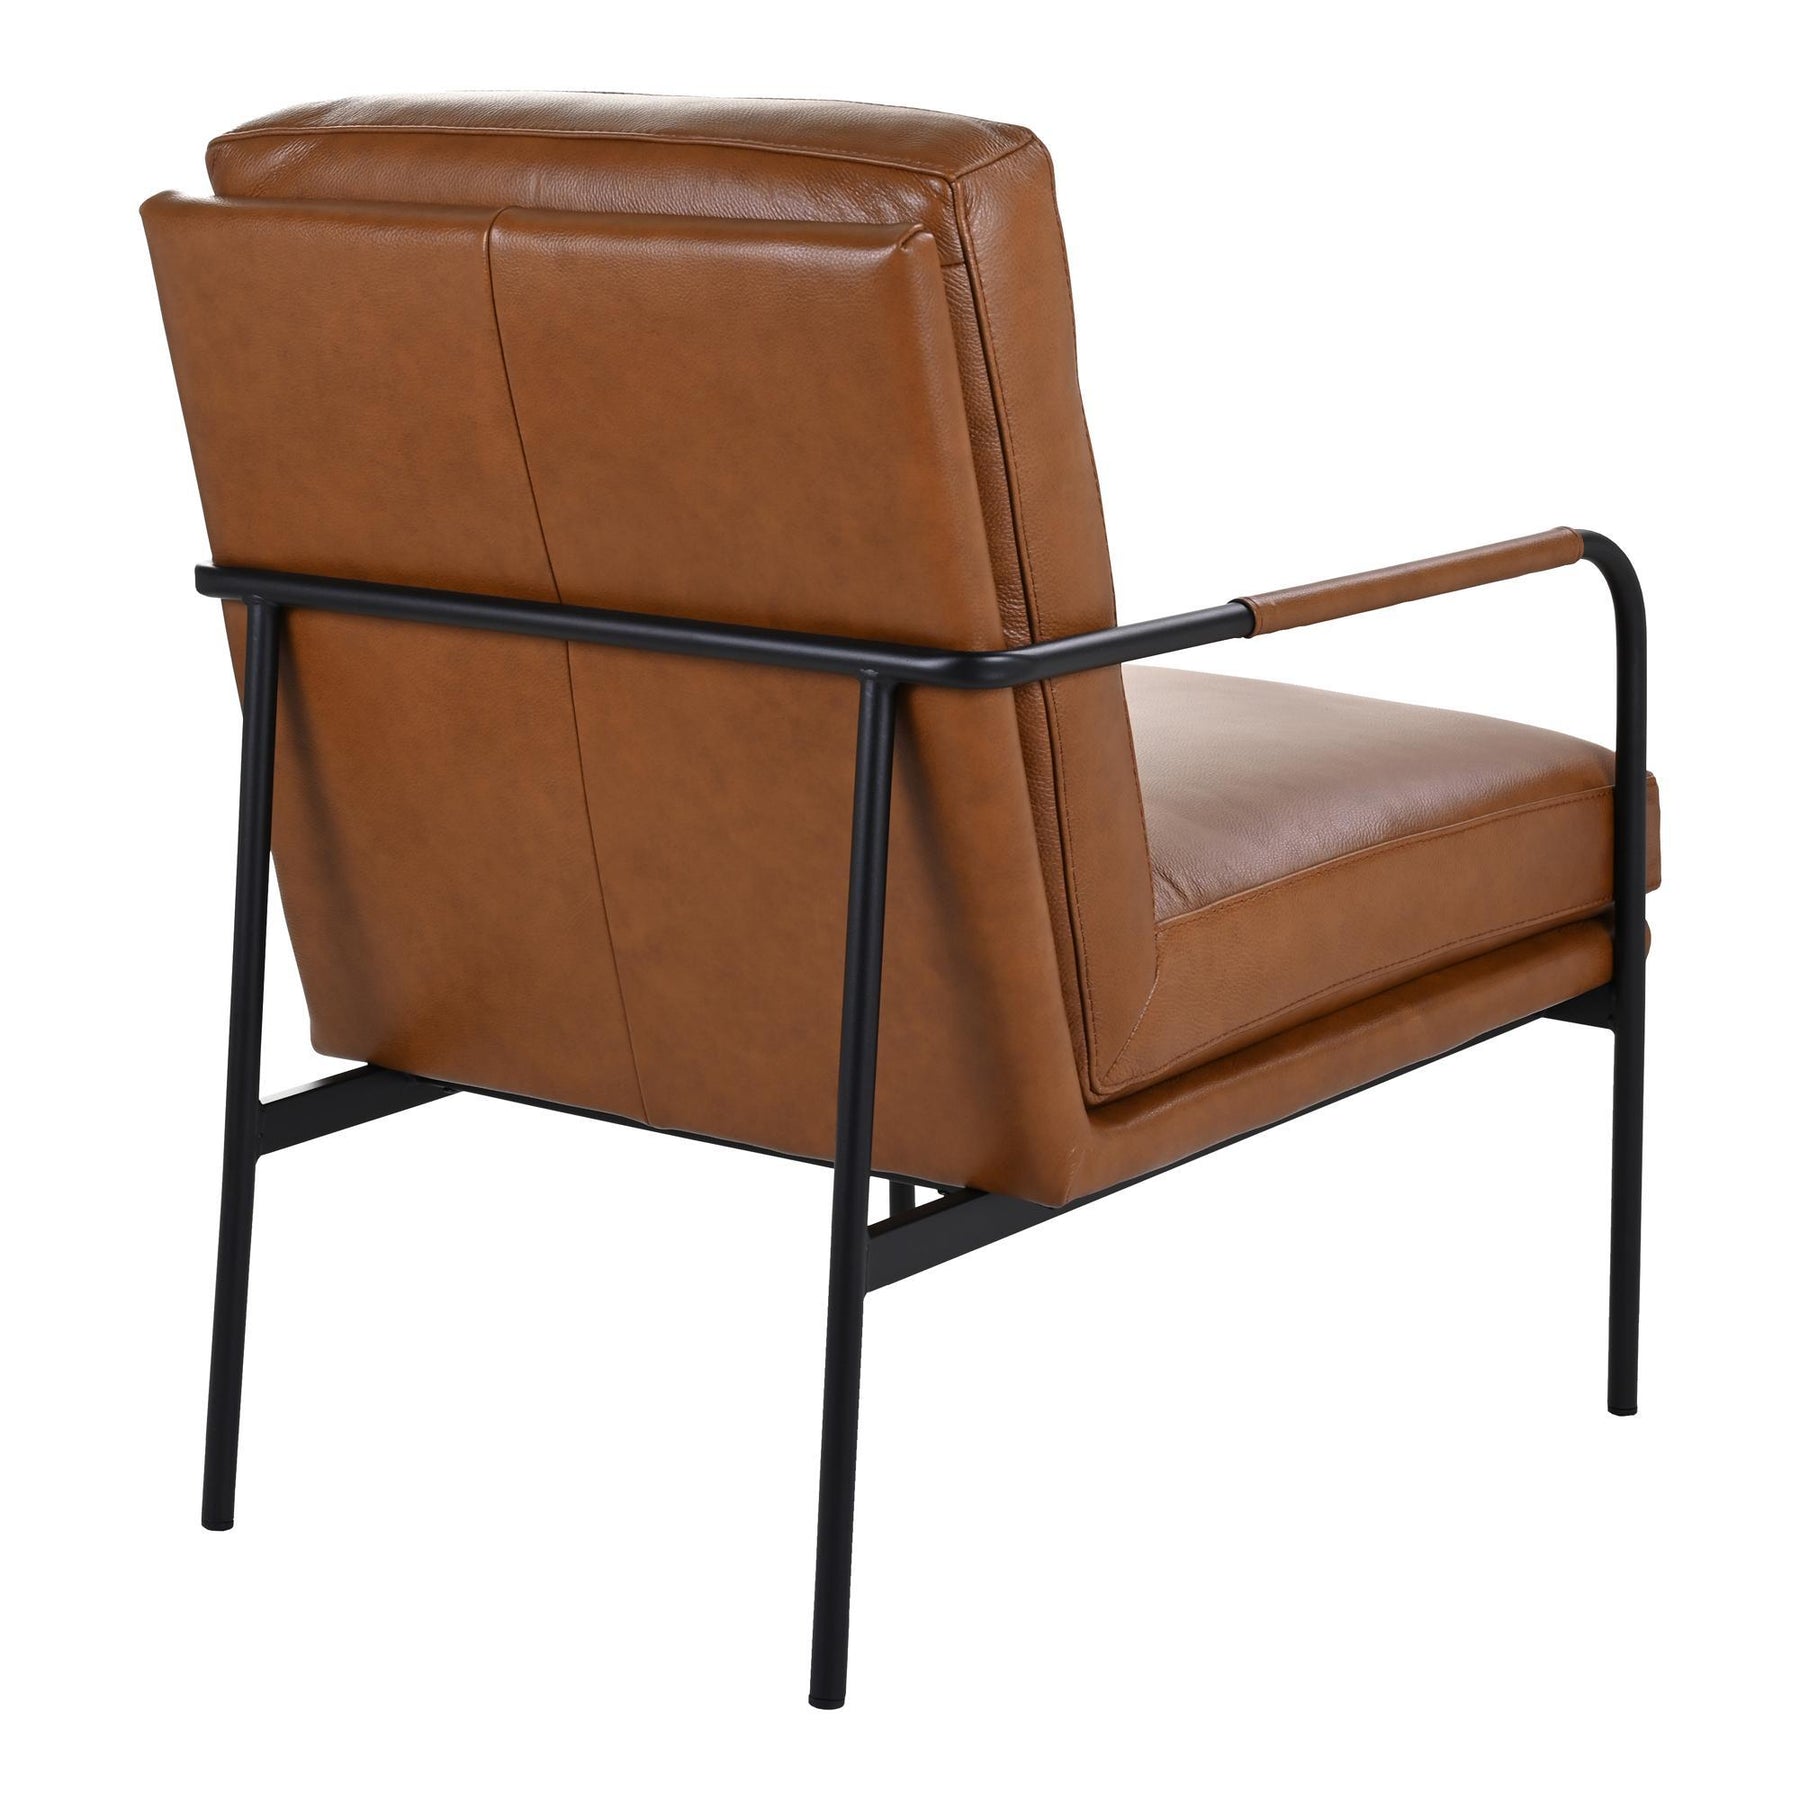 Moe's Home Collection Verlaine Chair Chestnut Brown - EQ-1013-03